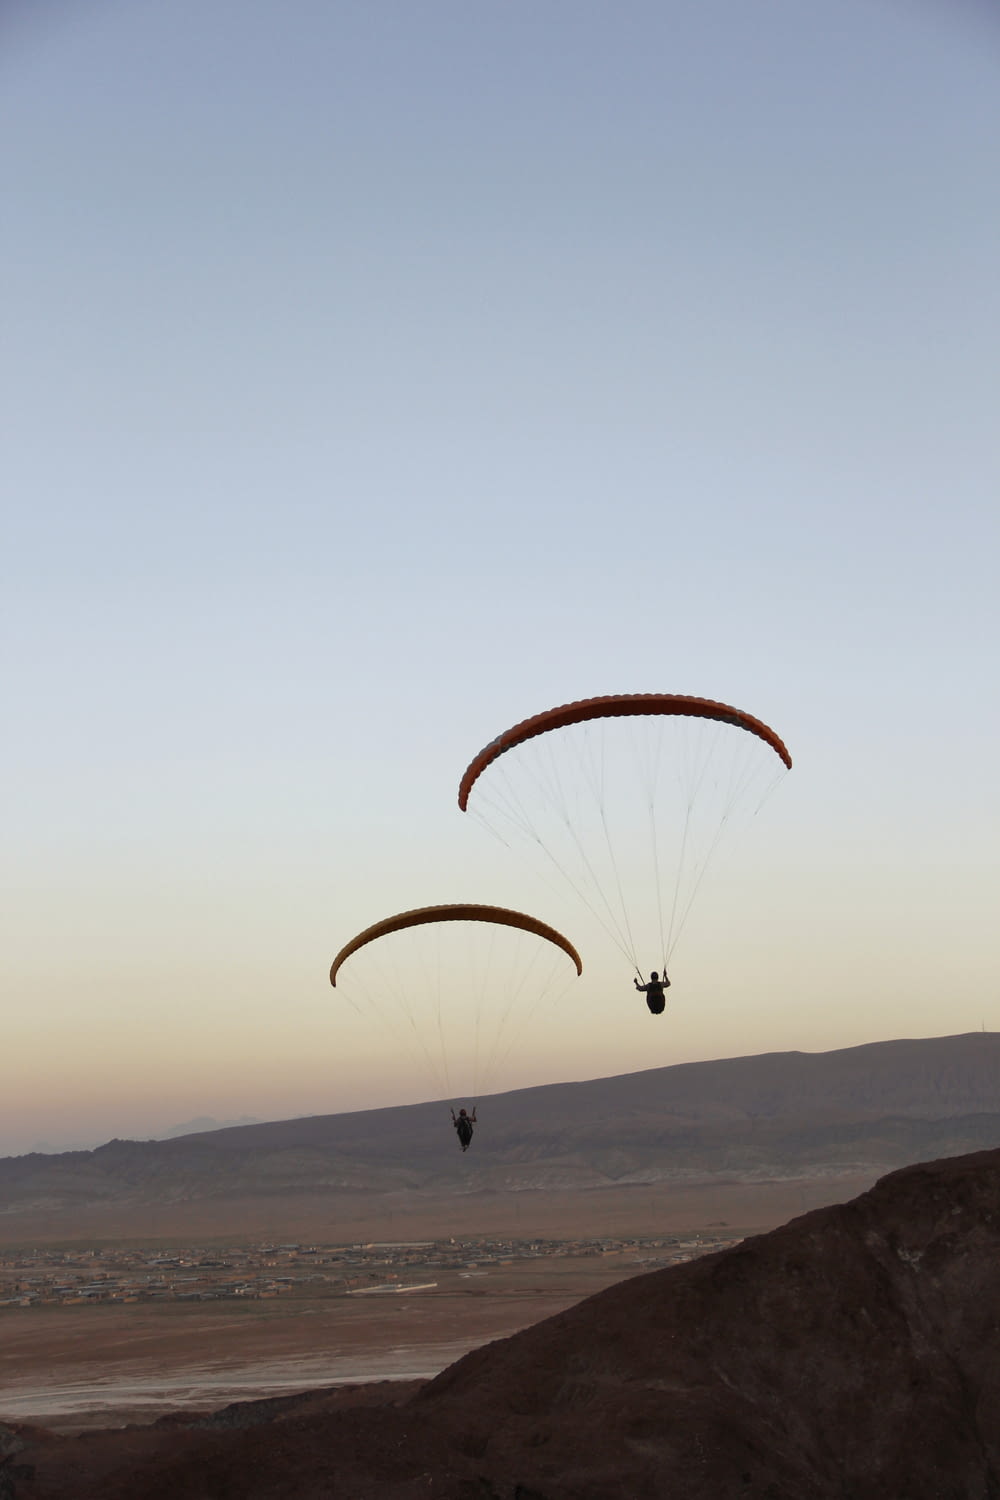 two parasailers in the air over a desert landscape